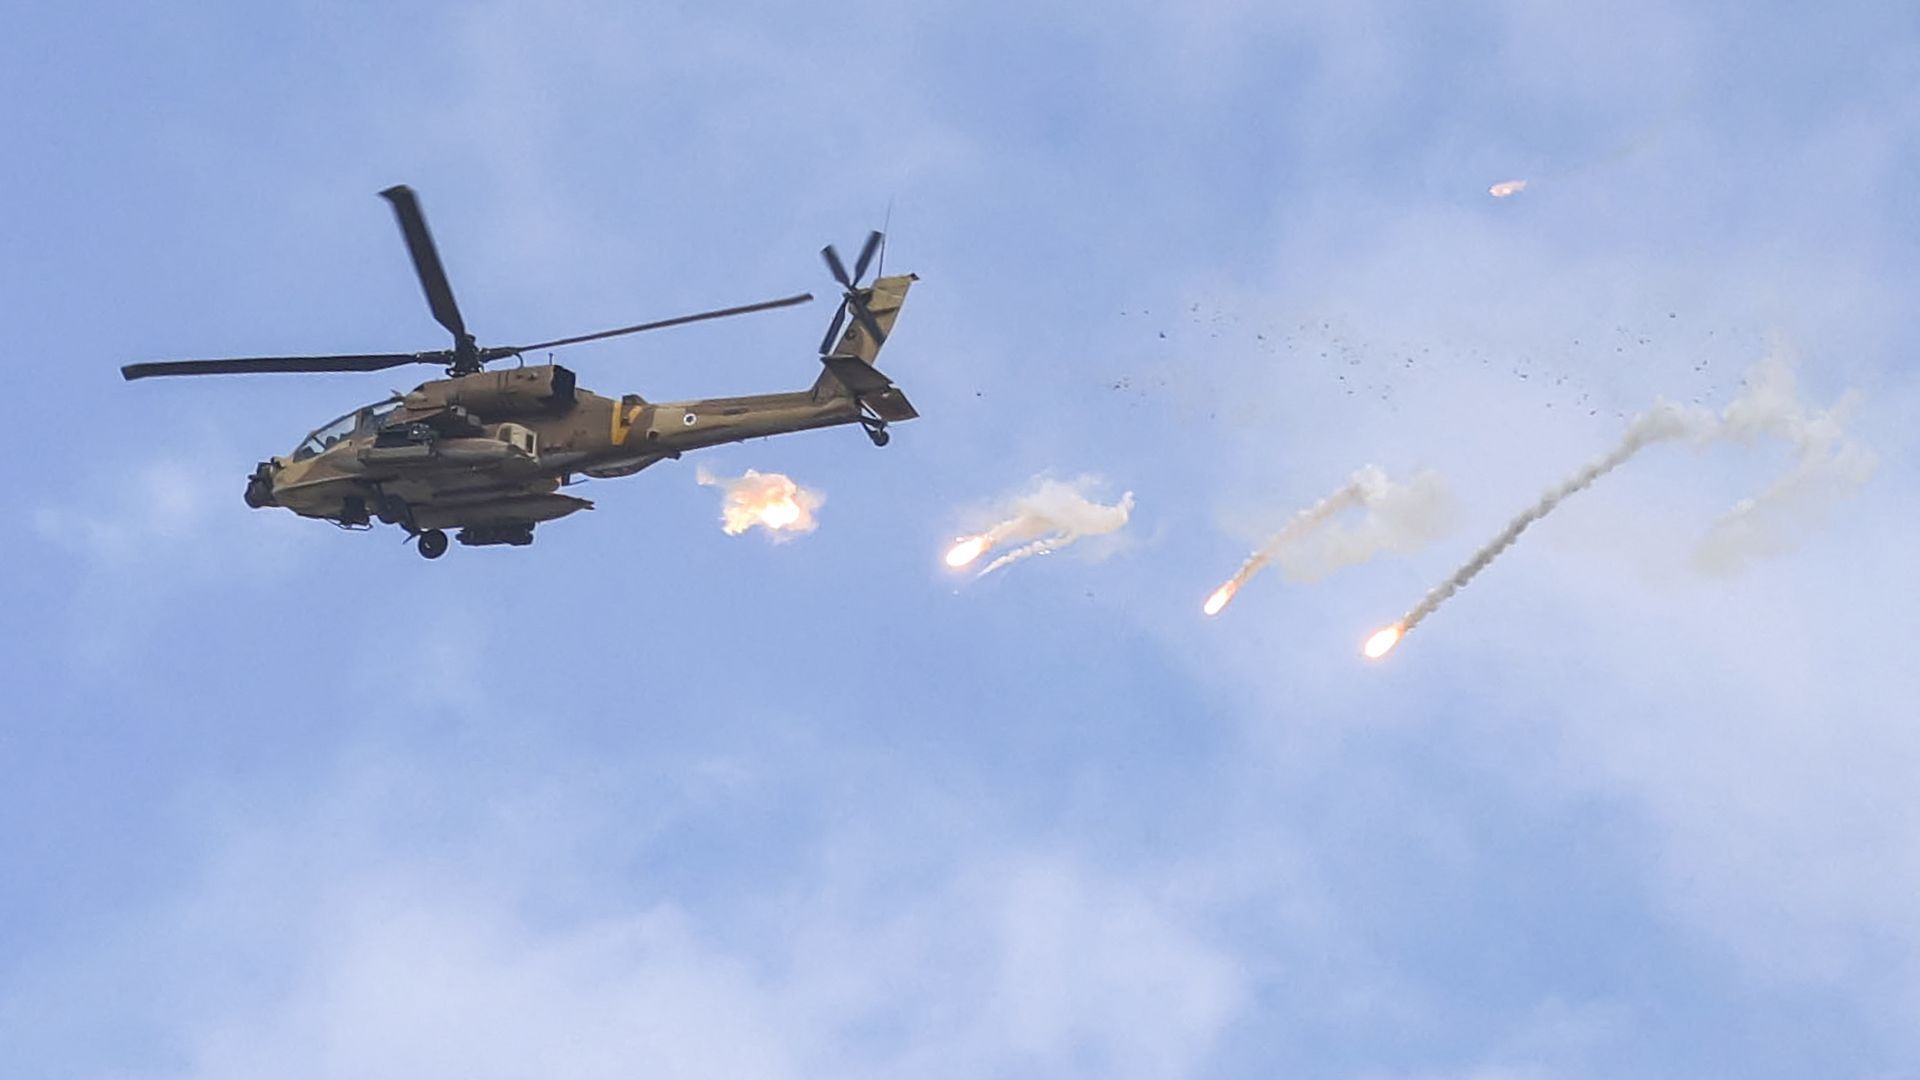 An Israeli Air Force AH-64 Apache attack helicopter releases flares during an Israeli army raid in Jenin in the occupied West Bank on June 19. Photo: Jaafar Ashtiyeh/AFP via Getty Images